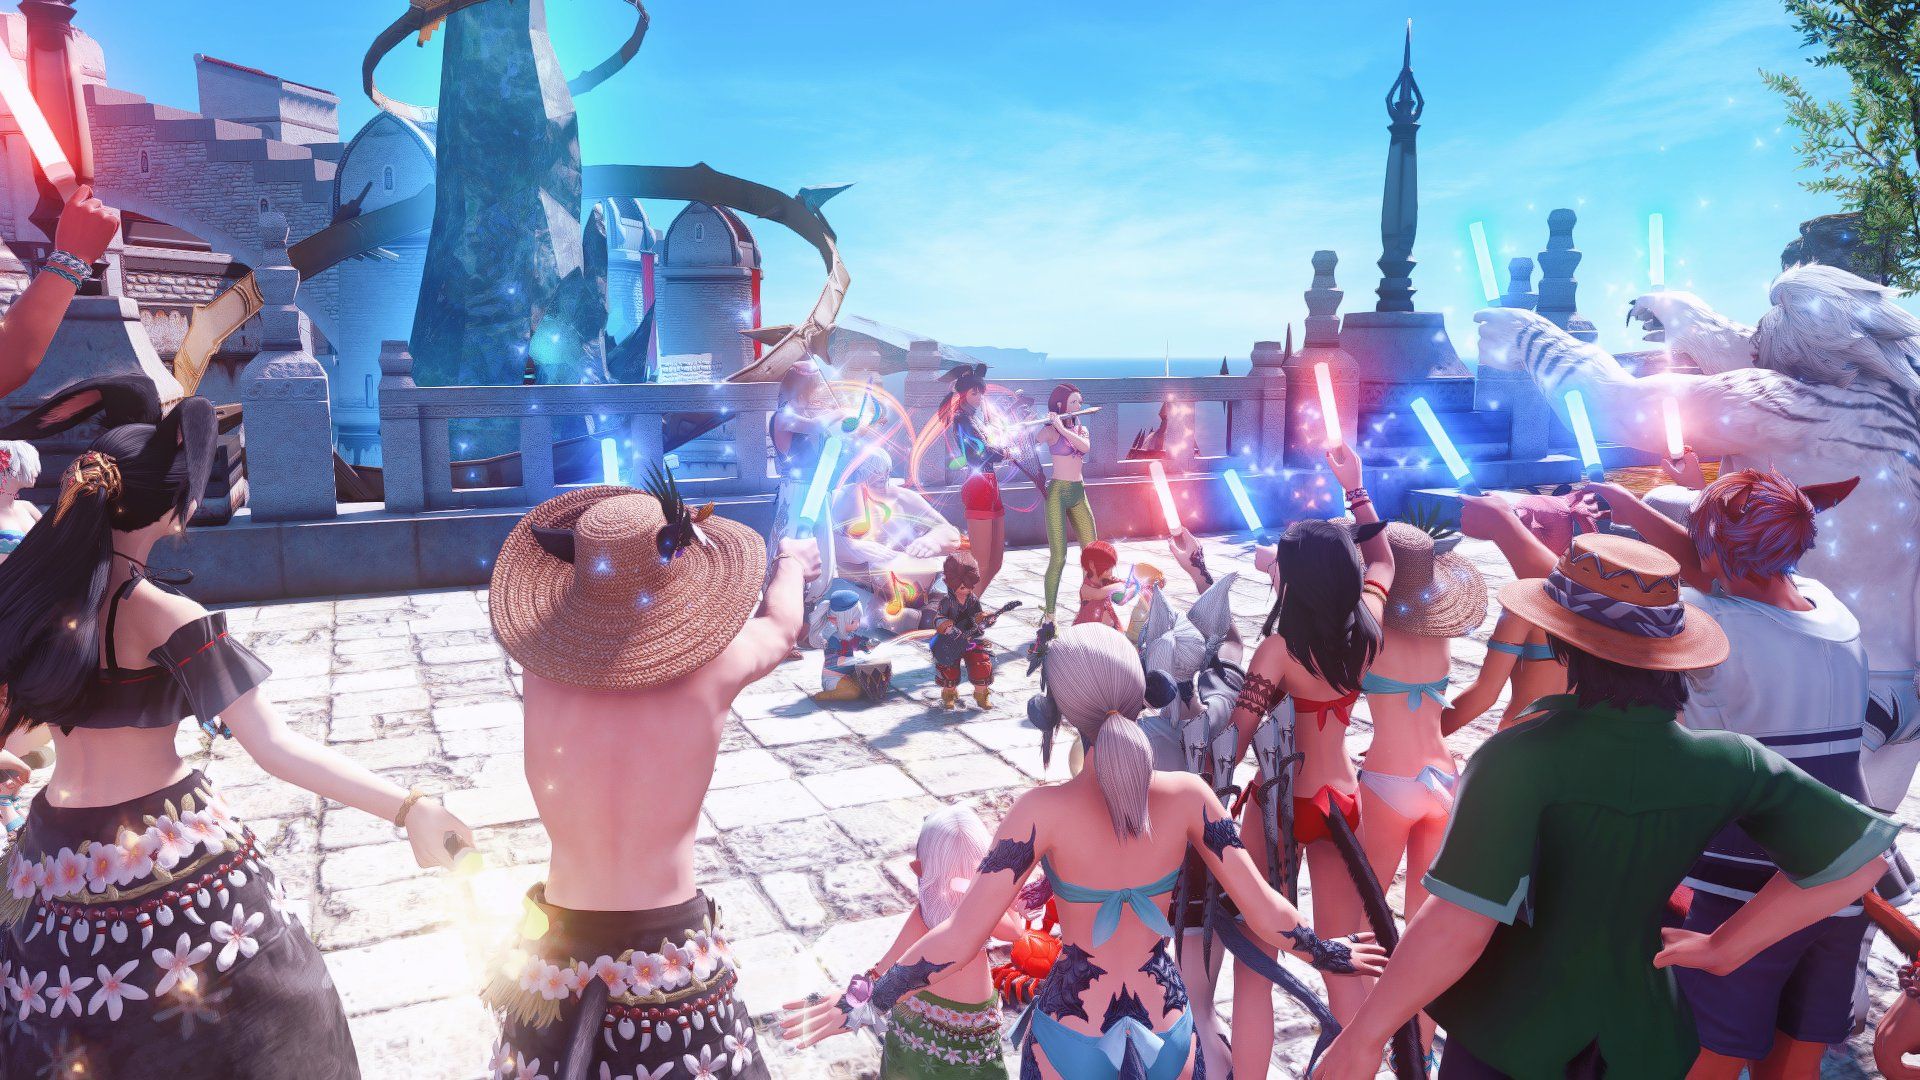 Final Fantasy 14 Lazy Afternoons bard band playing to a crowd in Limsa